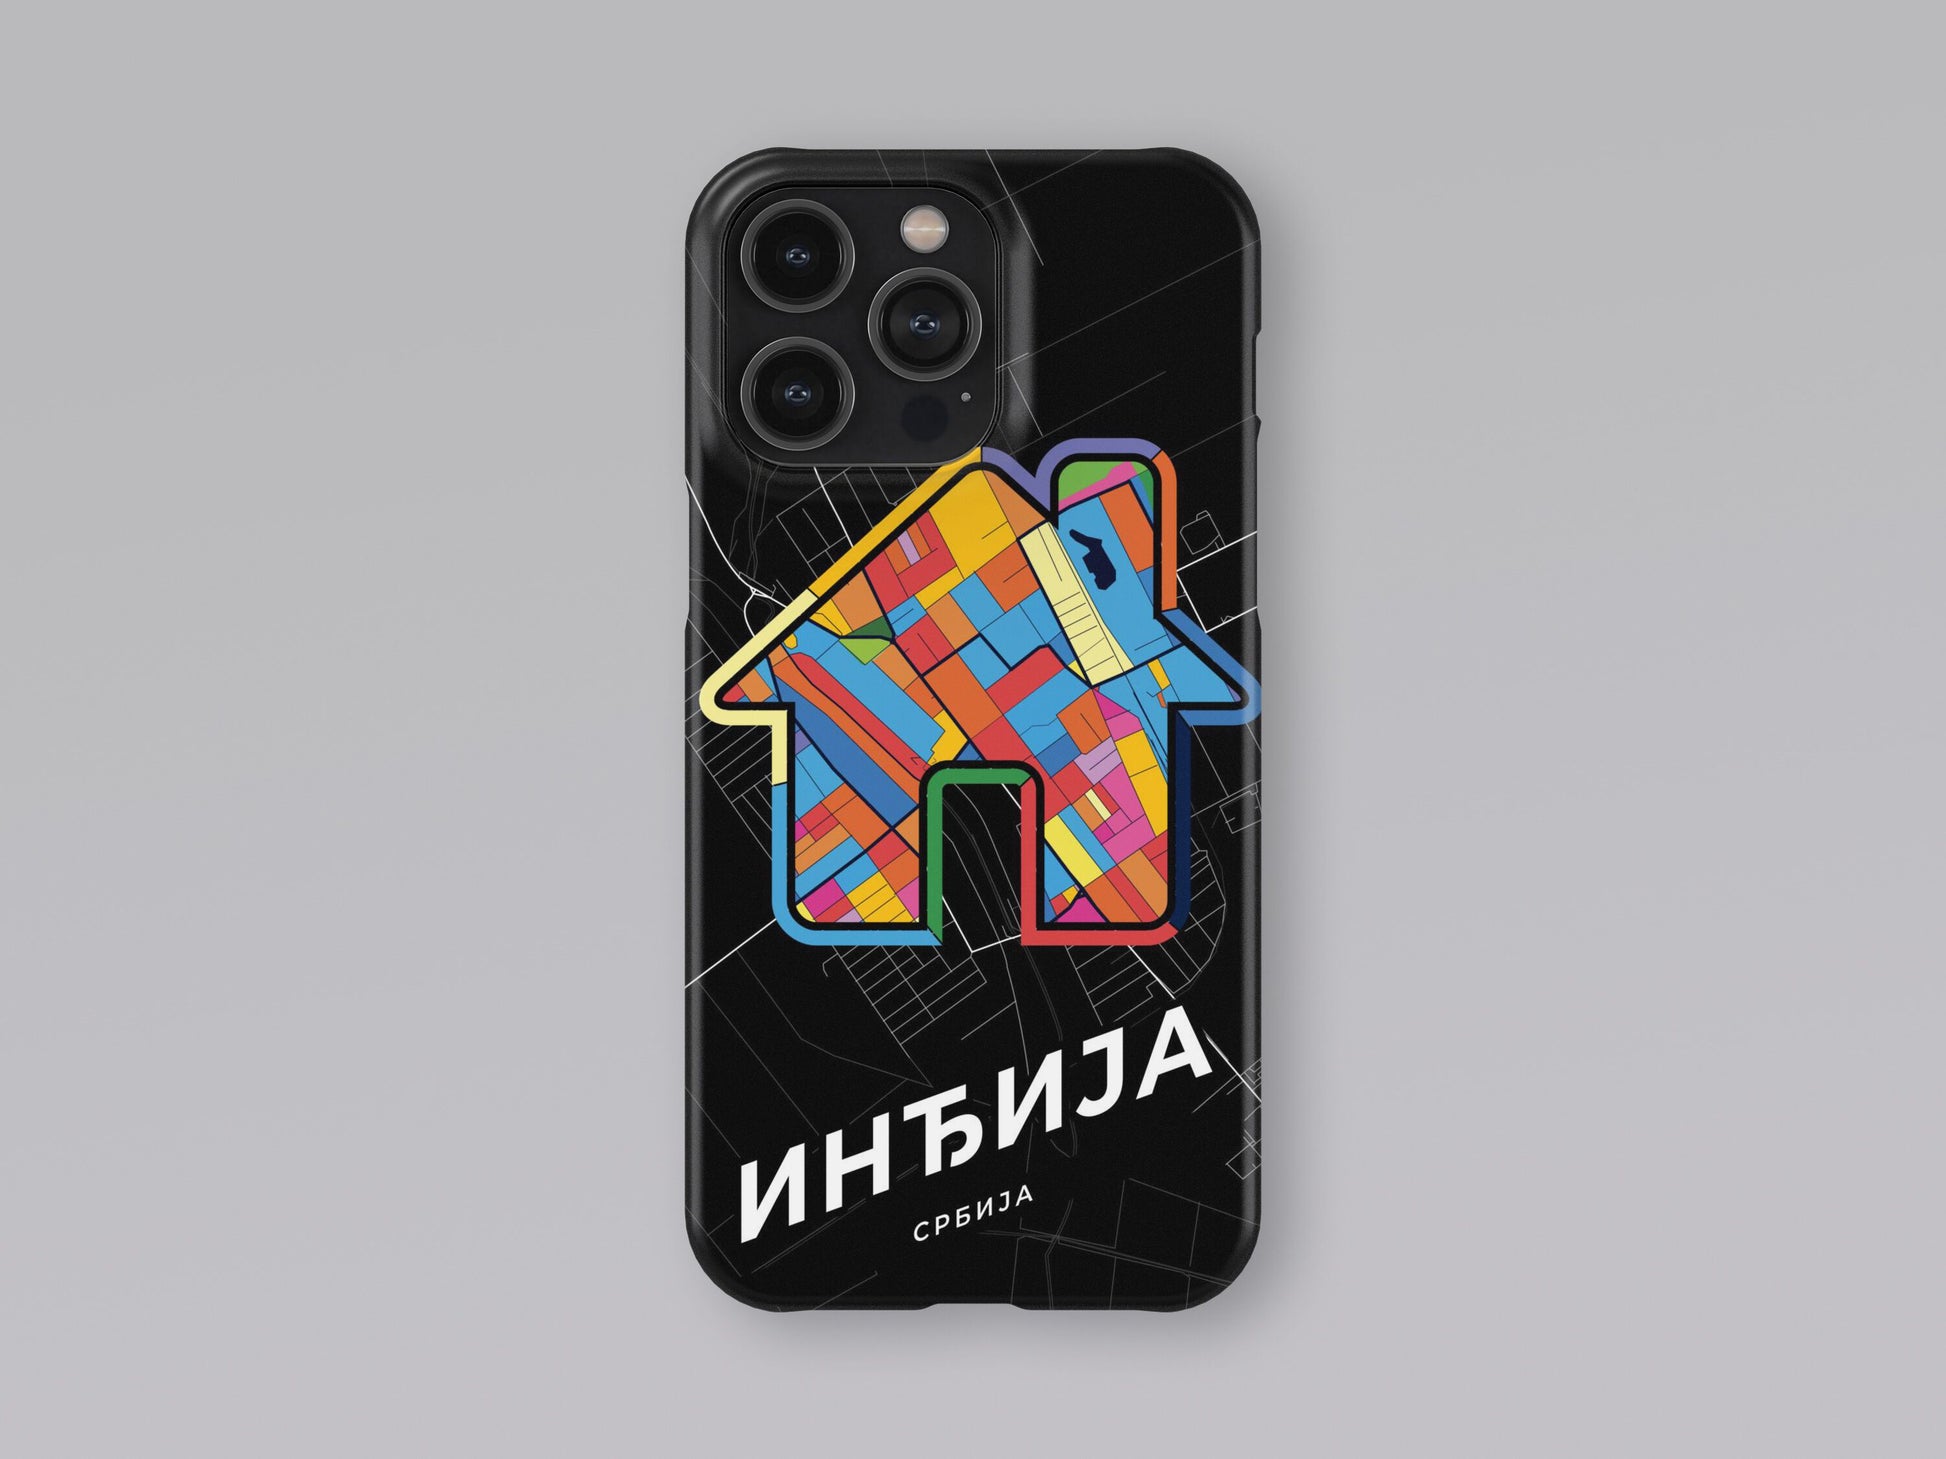 Inđija Serbia slim phone case with colorful icon. Birthday, wedding or housewarming gift. Couple match cases. 3